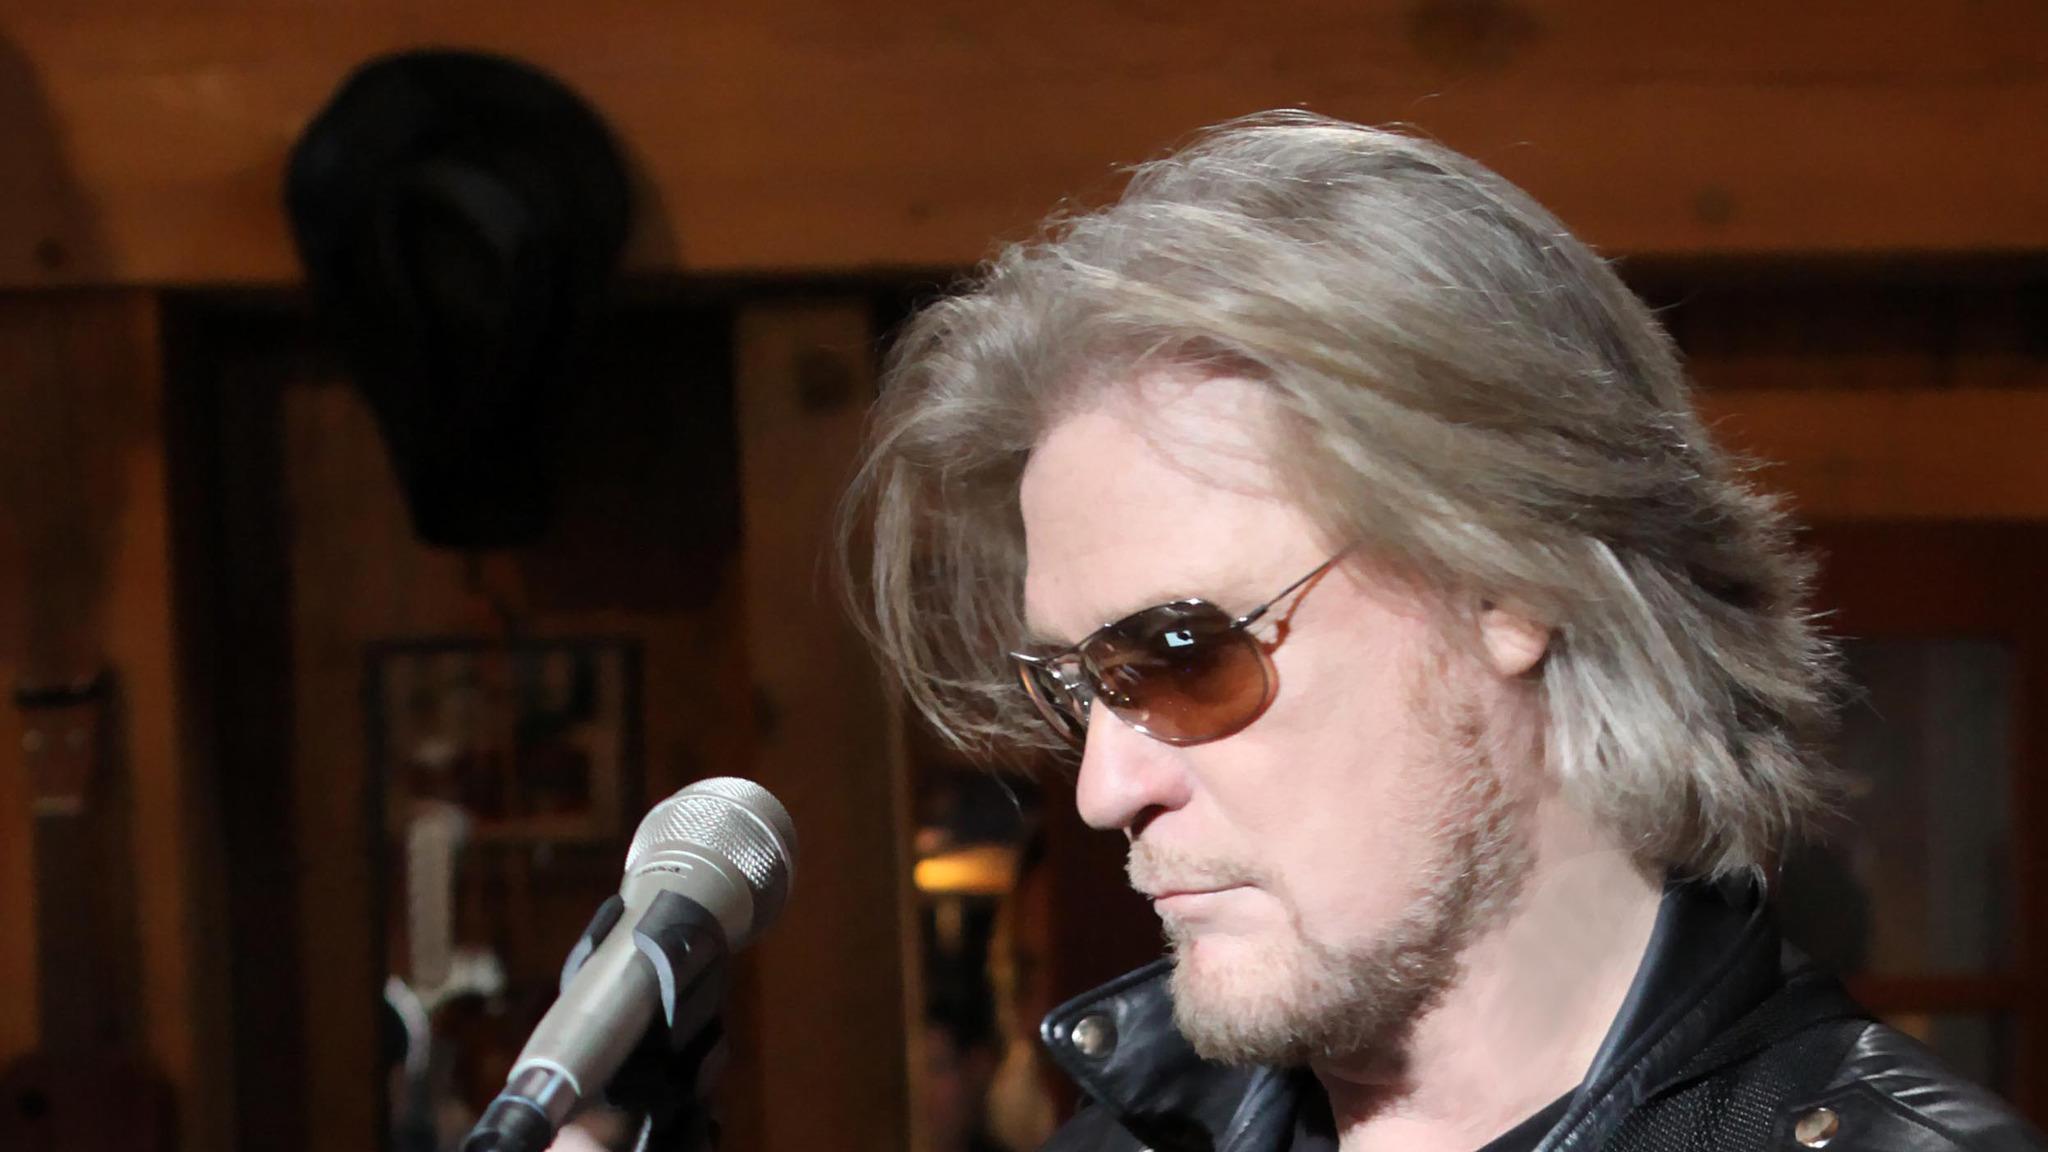 Daryl Hall and the Daryl's House Band with Special Guest Todd Rundgren pre-sale code for event tickets in Tulsa, OK (Brady Theater)